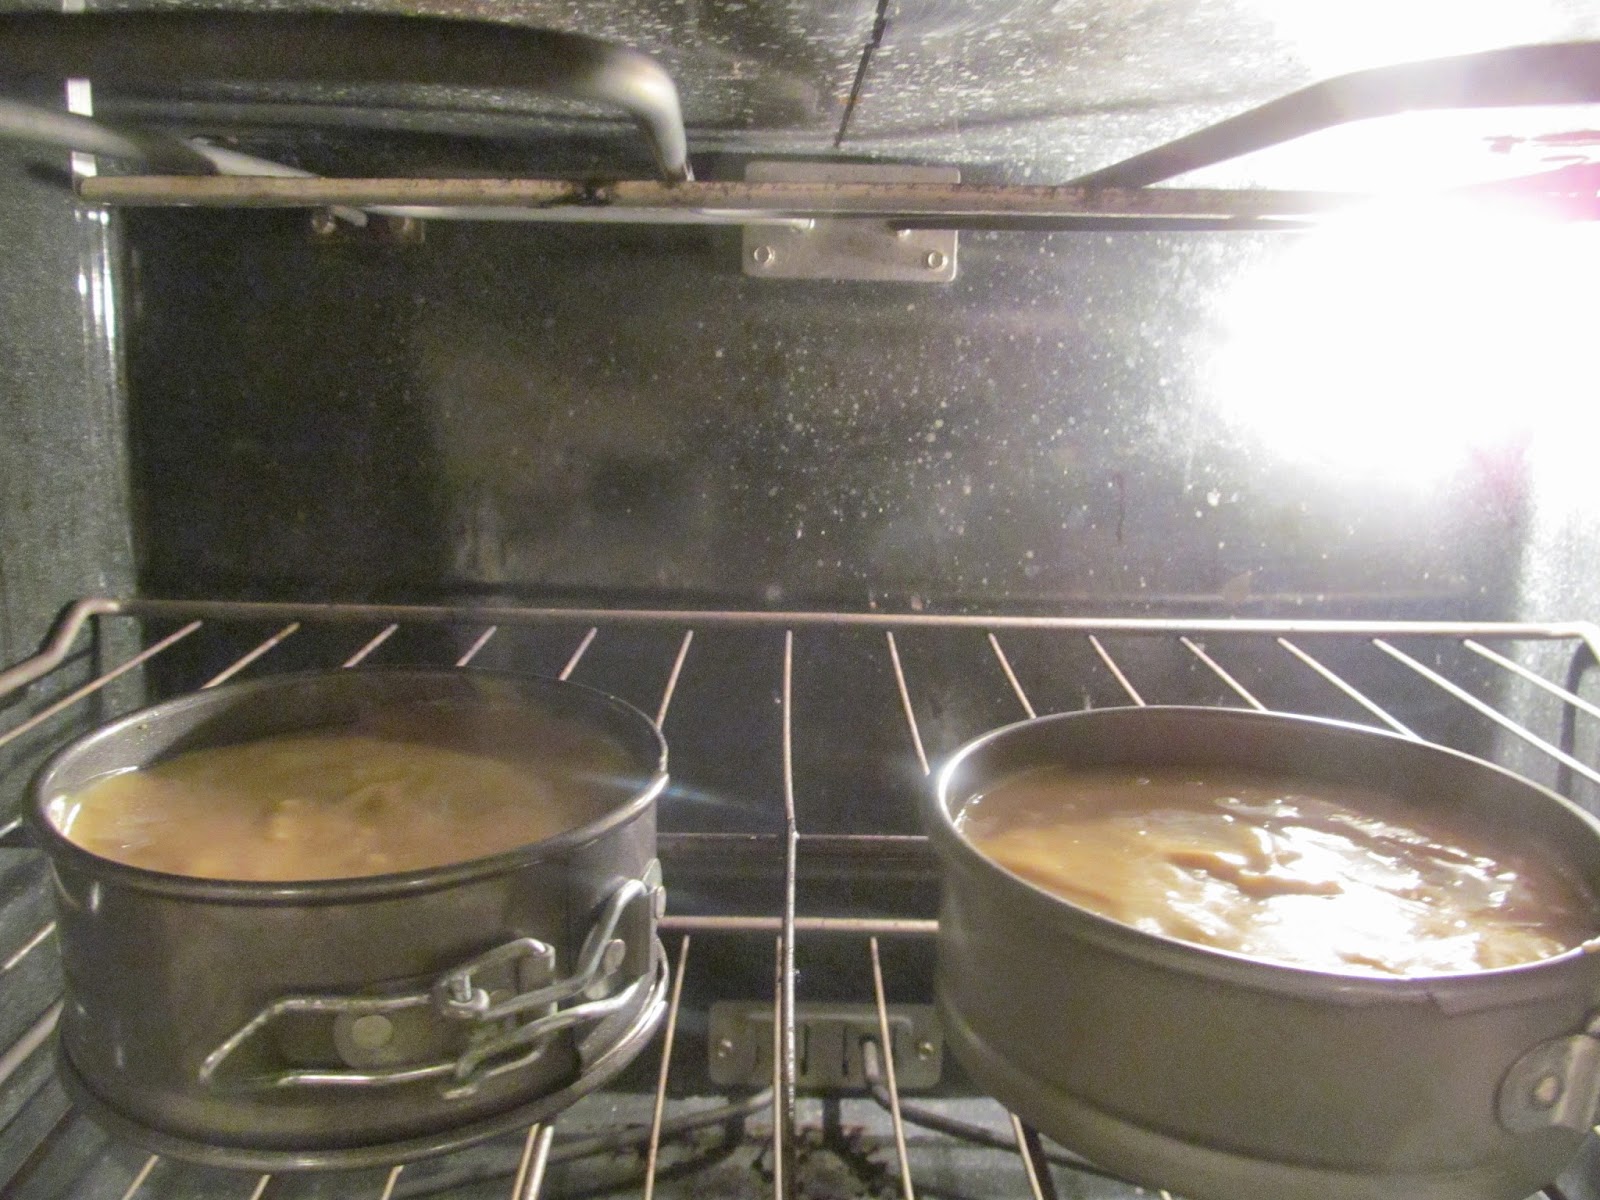 cheesecakes in the oven